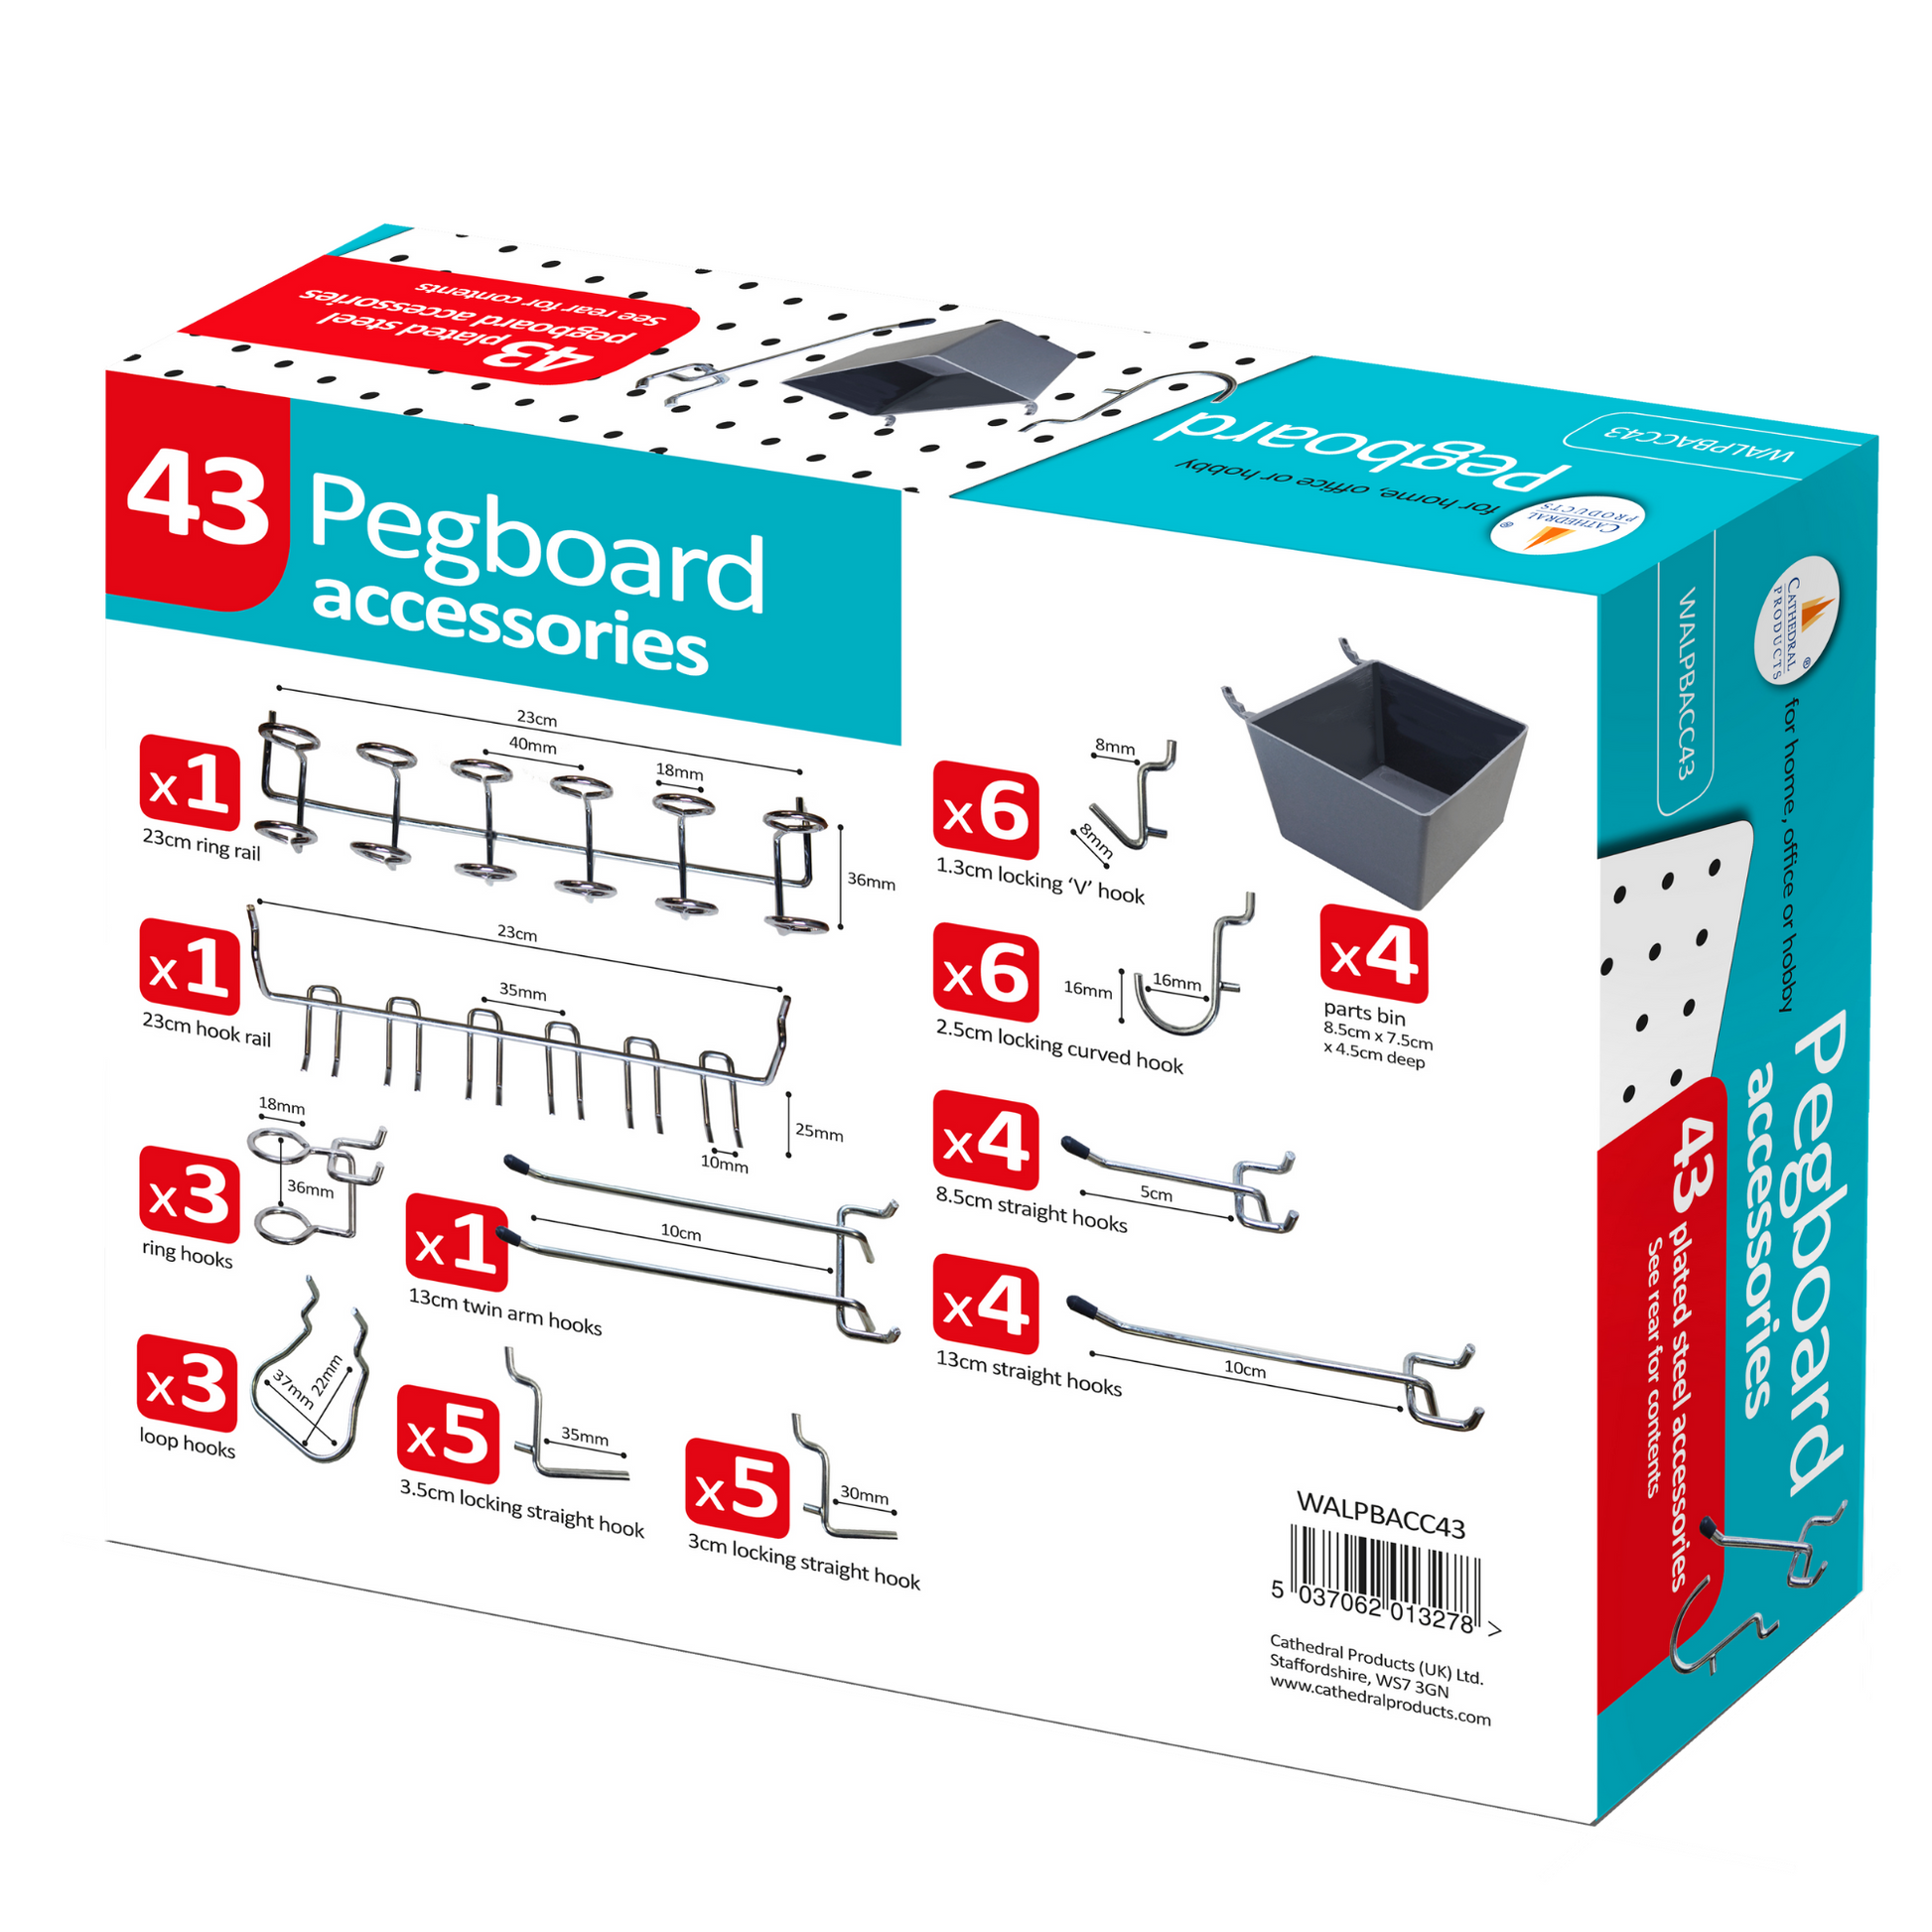 Cathedral Products Pegboard Accessories kit featuring 43 items including a variety of hooks and a parts bin, with detailed illustrations and quantities for each item